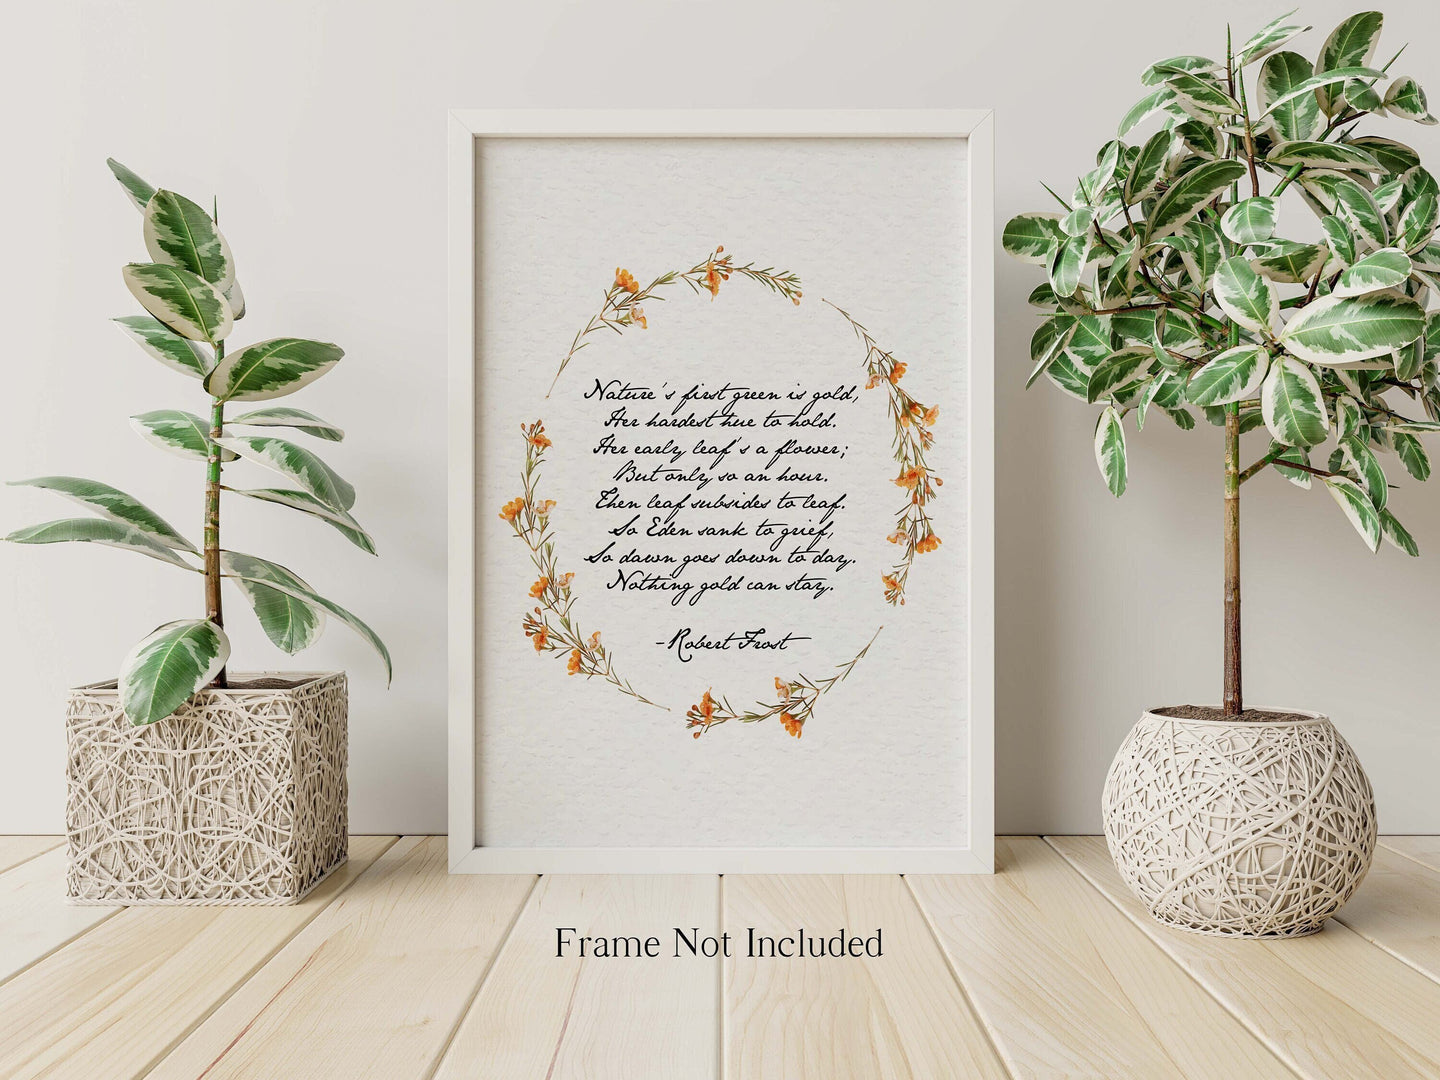 Robert Frost Poem Print - Nothing gold can stay